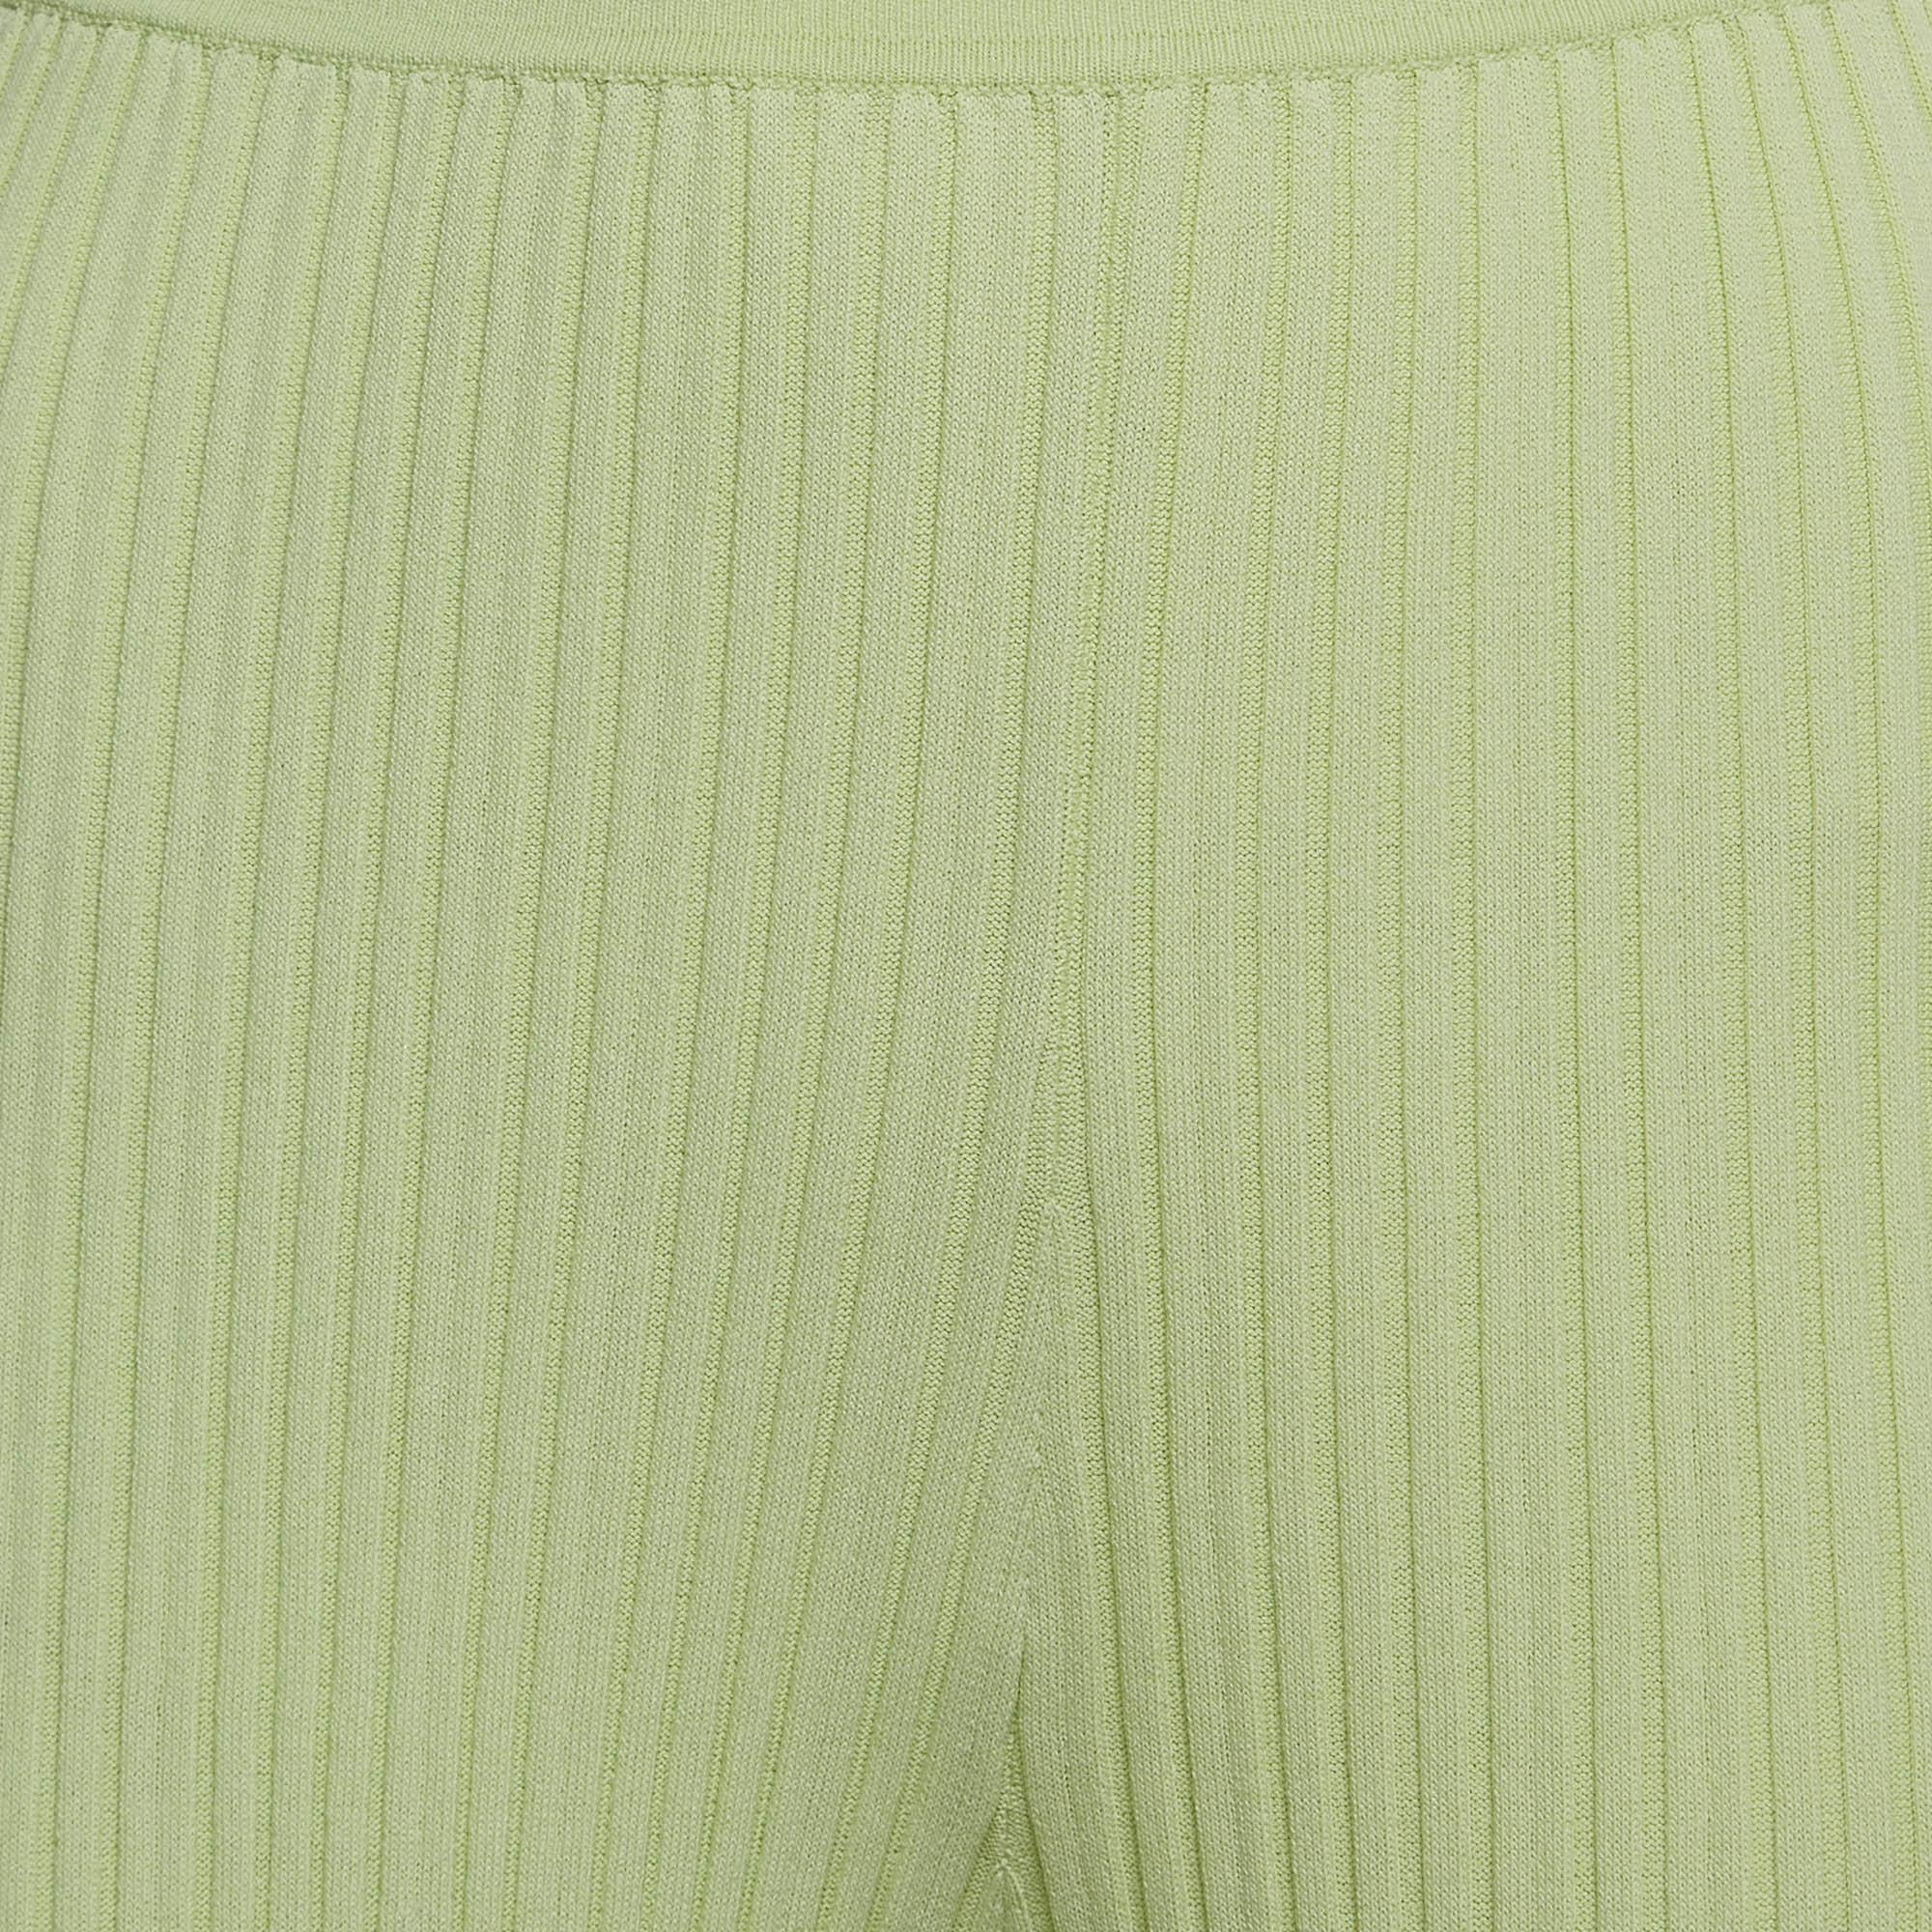 Dion Lee Mint Green Ribbed Knit Pants M In Excellent Condition For Sale In Dubai, Al Qouz 2